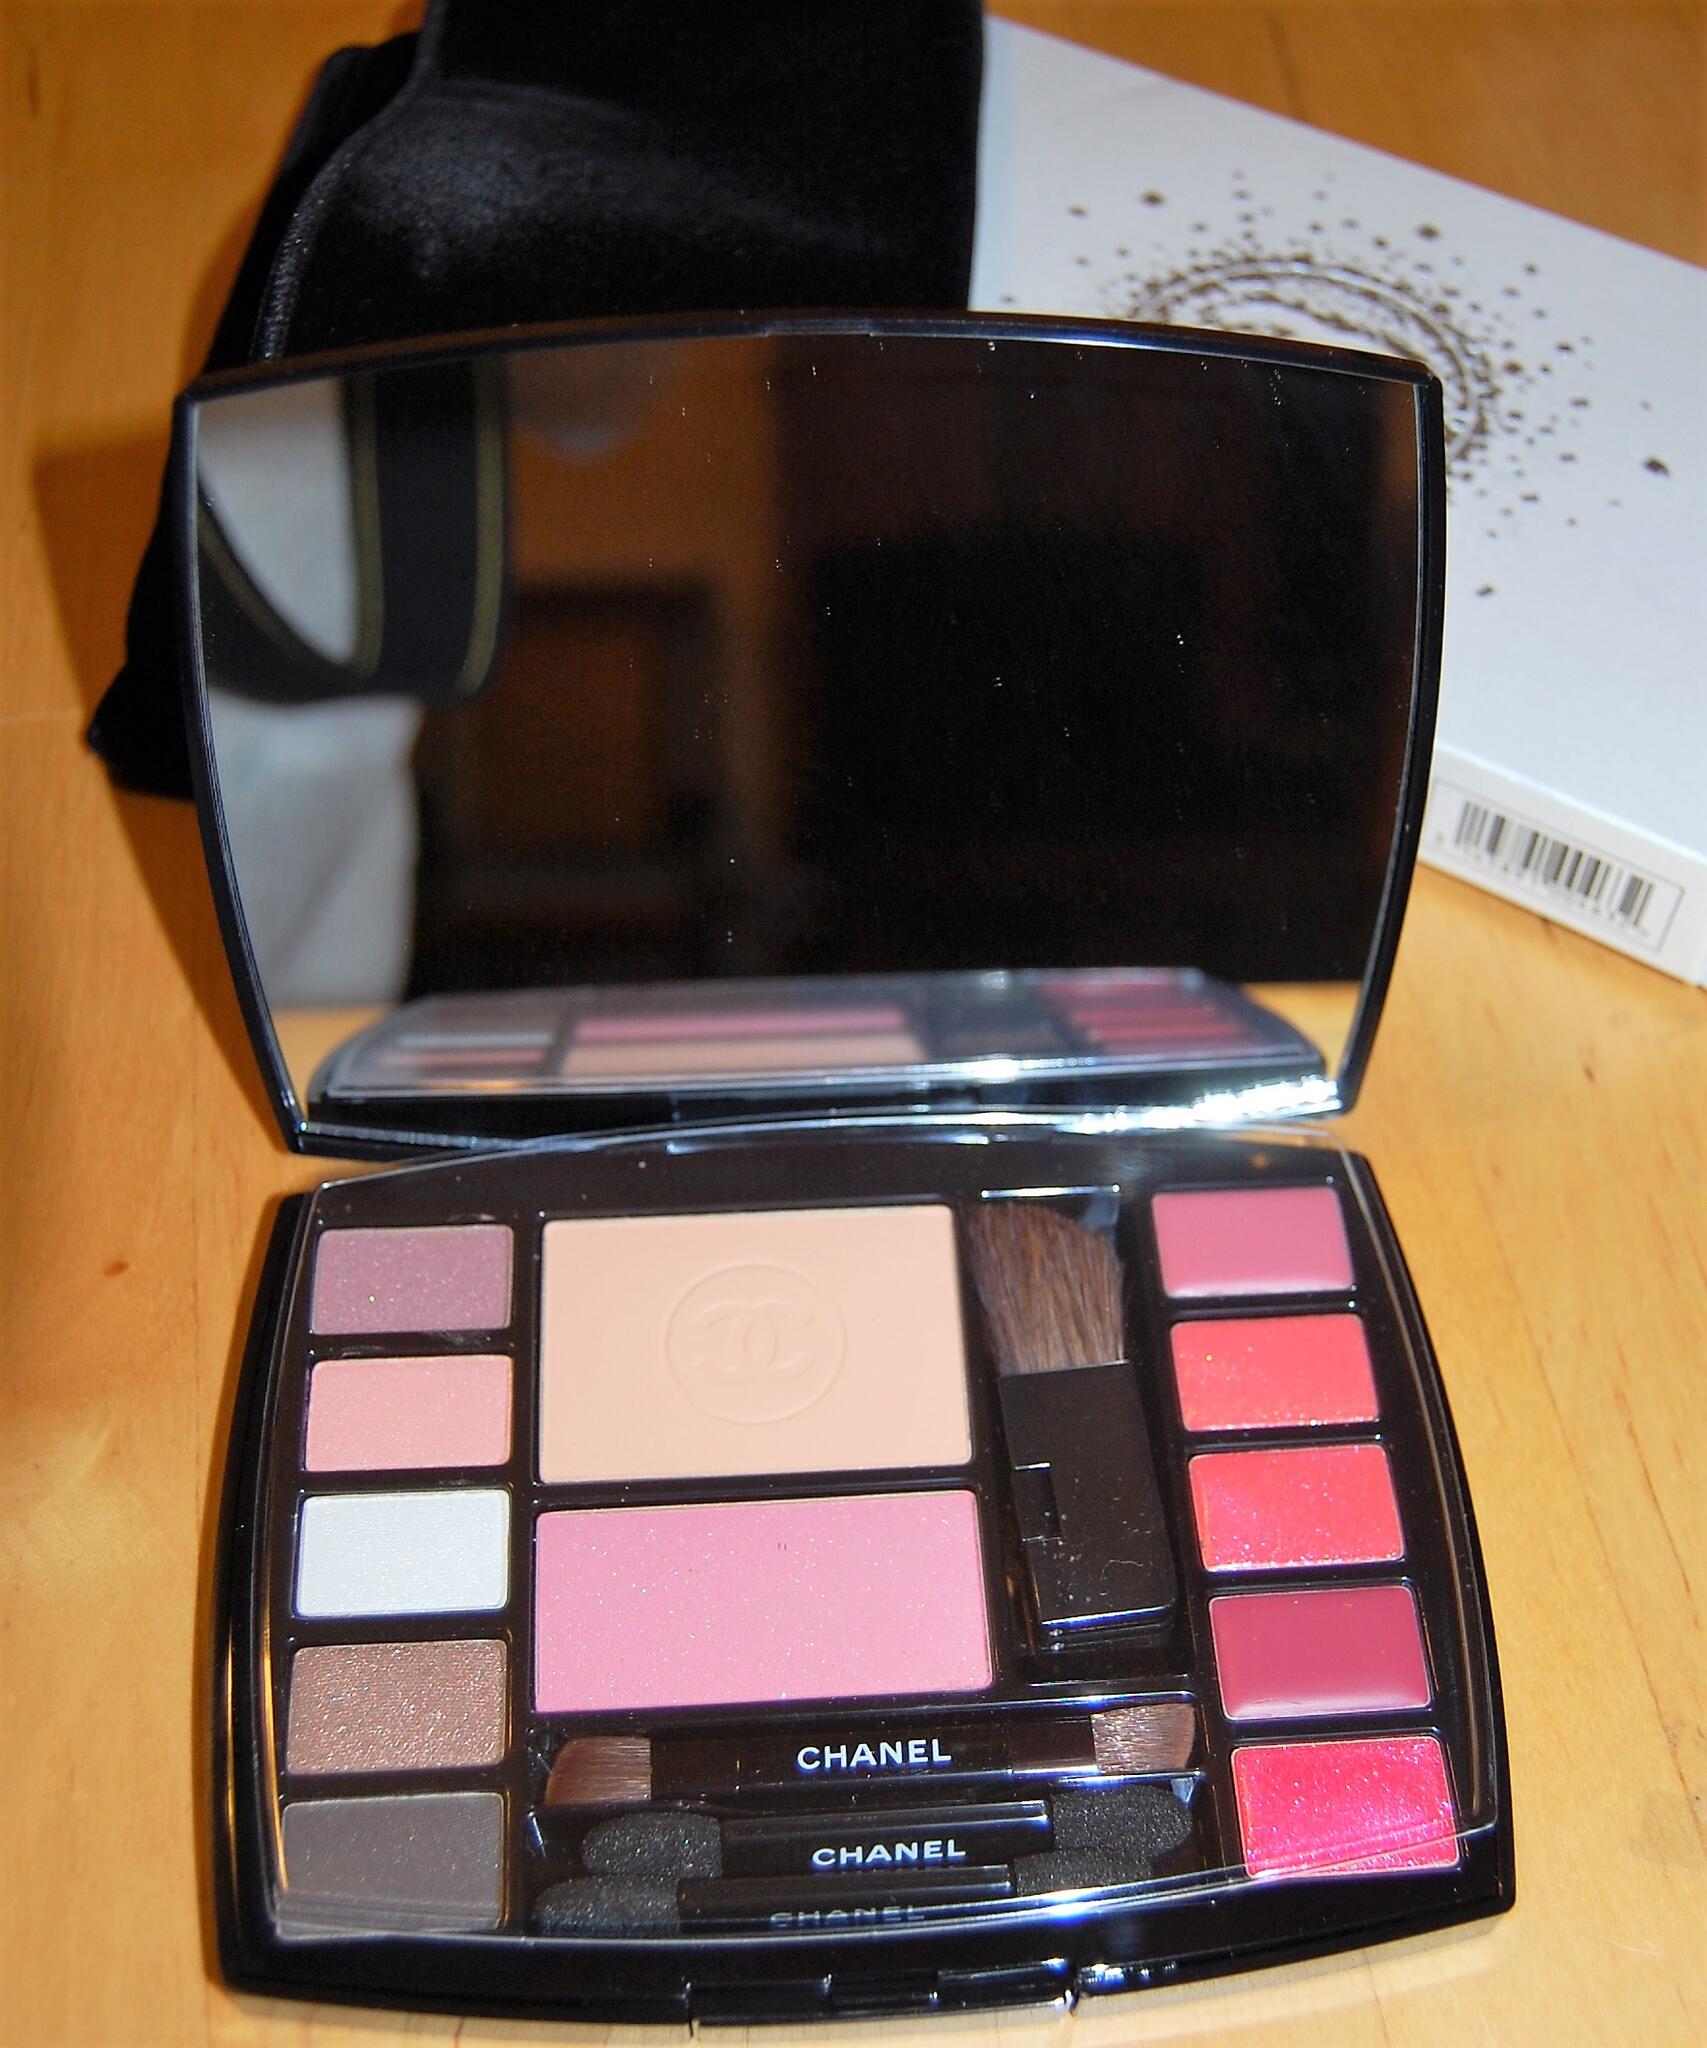 CHANEL Limited Edition Travel Makeup Palette For $50 In Irvine, CA